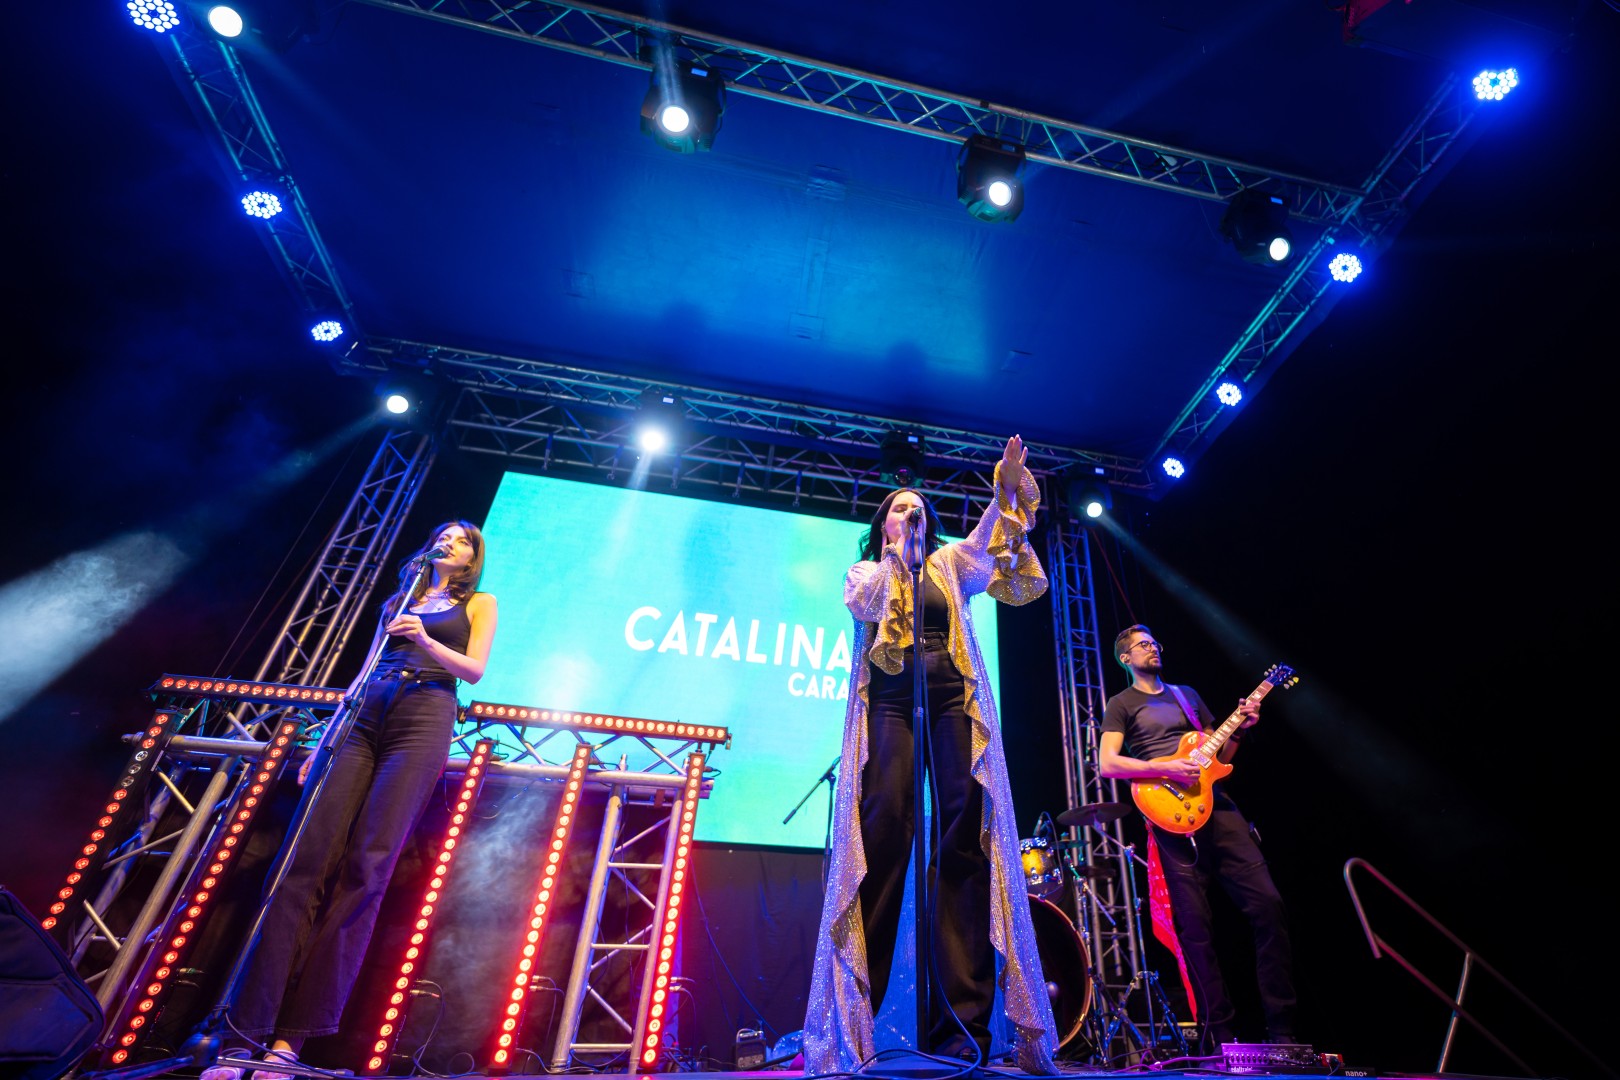 Catalina Cara at Clubul Diplomatic in Bucharest on September 15, 2022 (be70e94286)